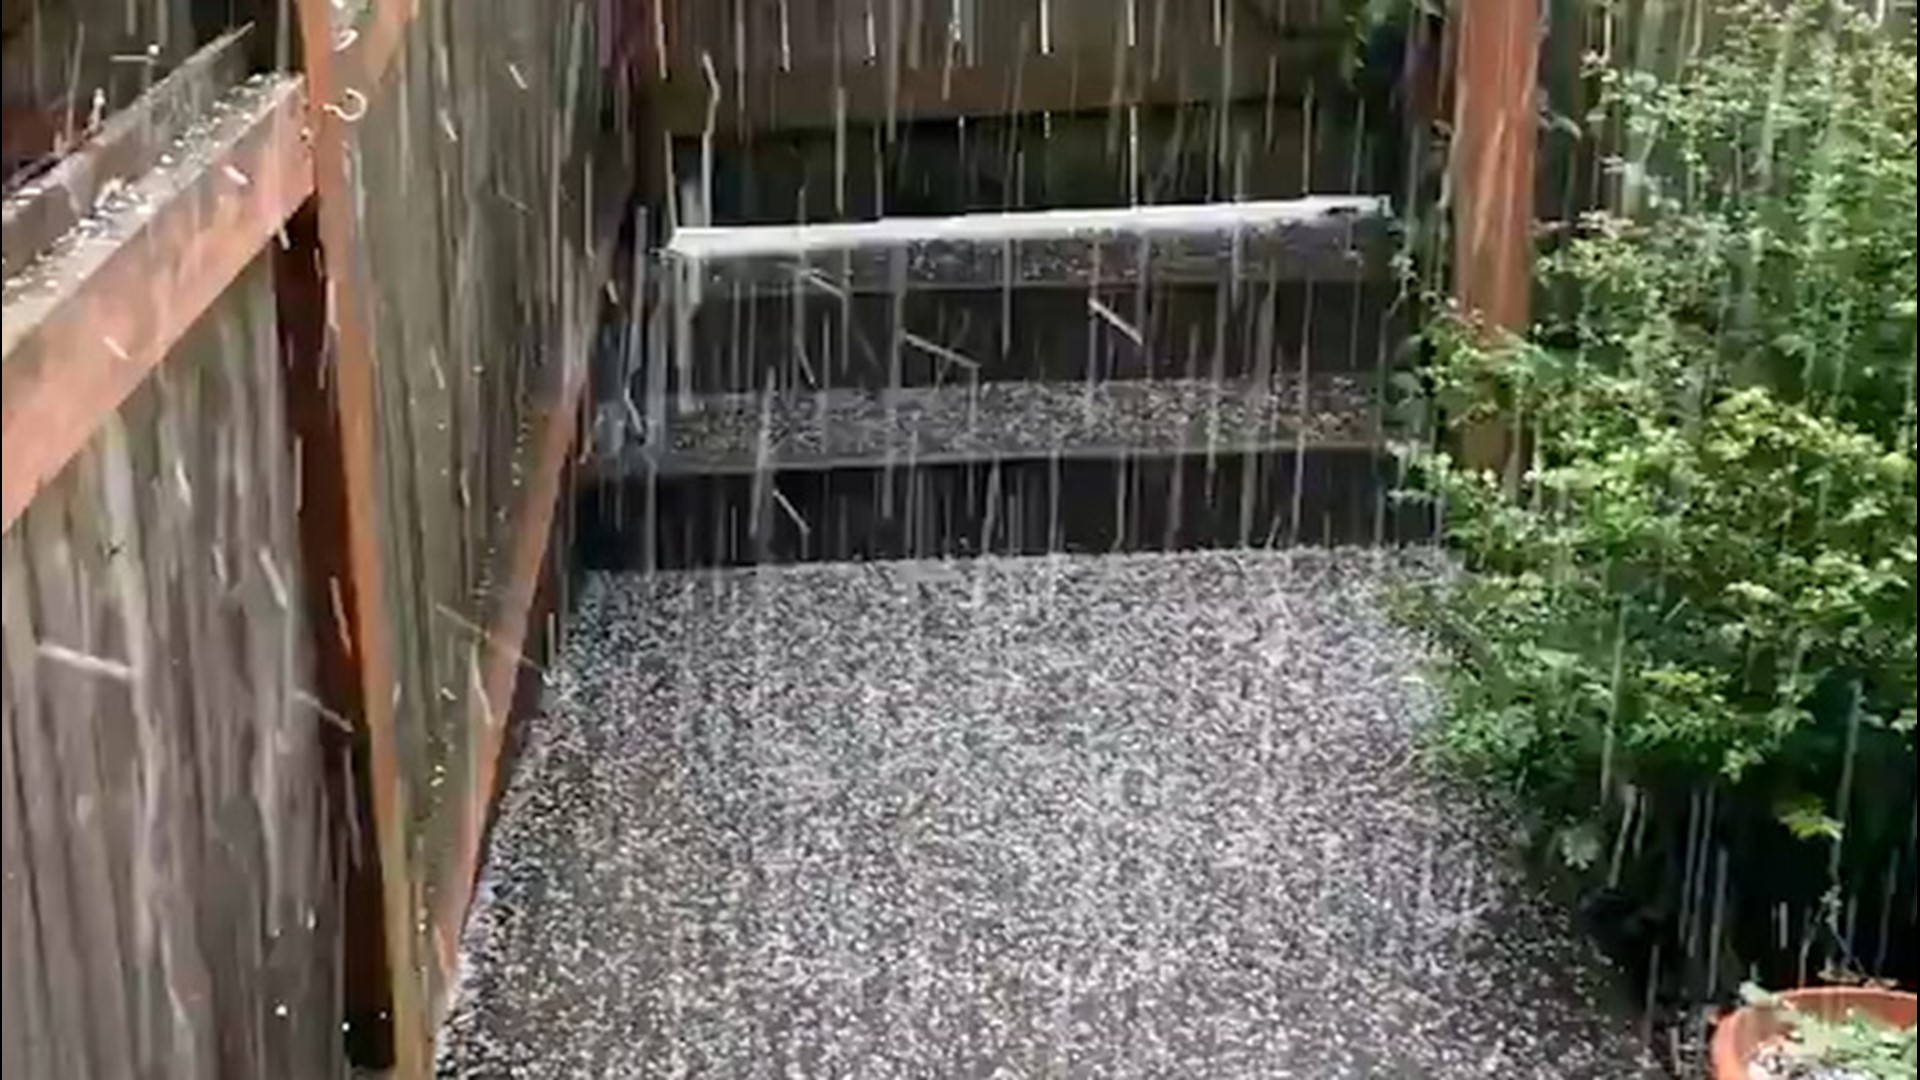 On Monday, March 30, a hailstorm passed through Seattle, Washington, around midday.